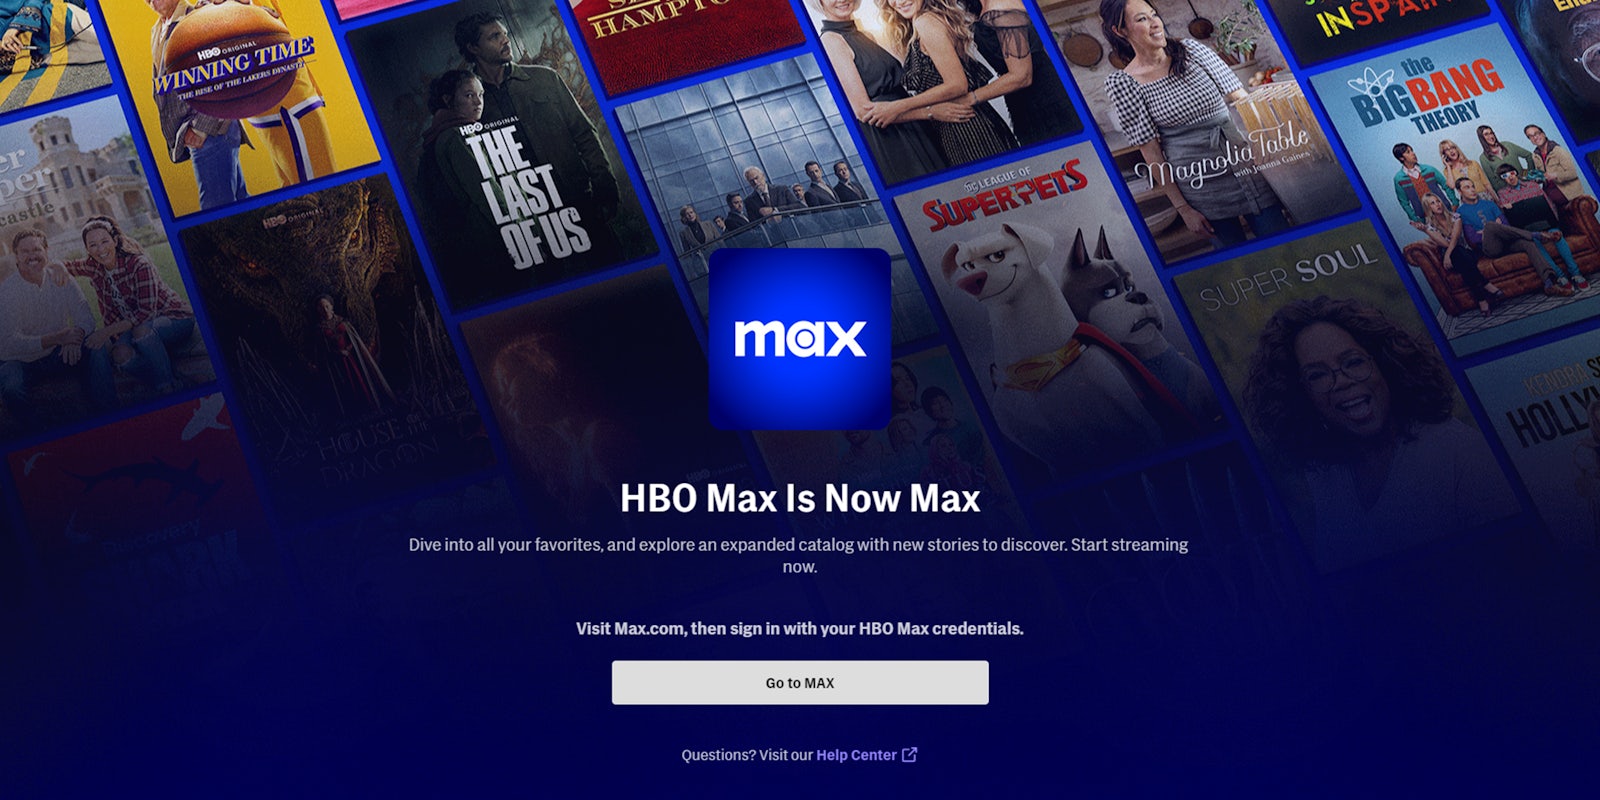 Why Is HBO Max Removing Shows? Their Answer and a Full List